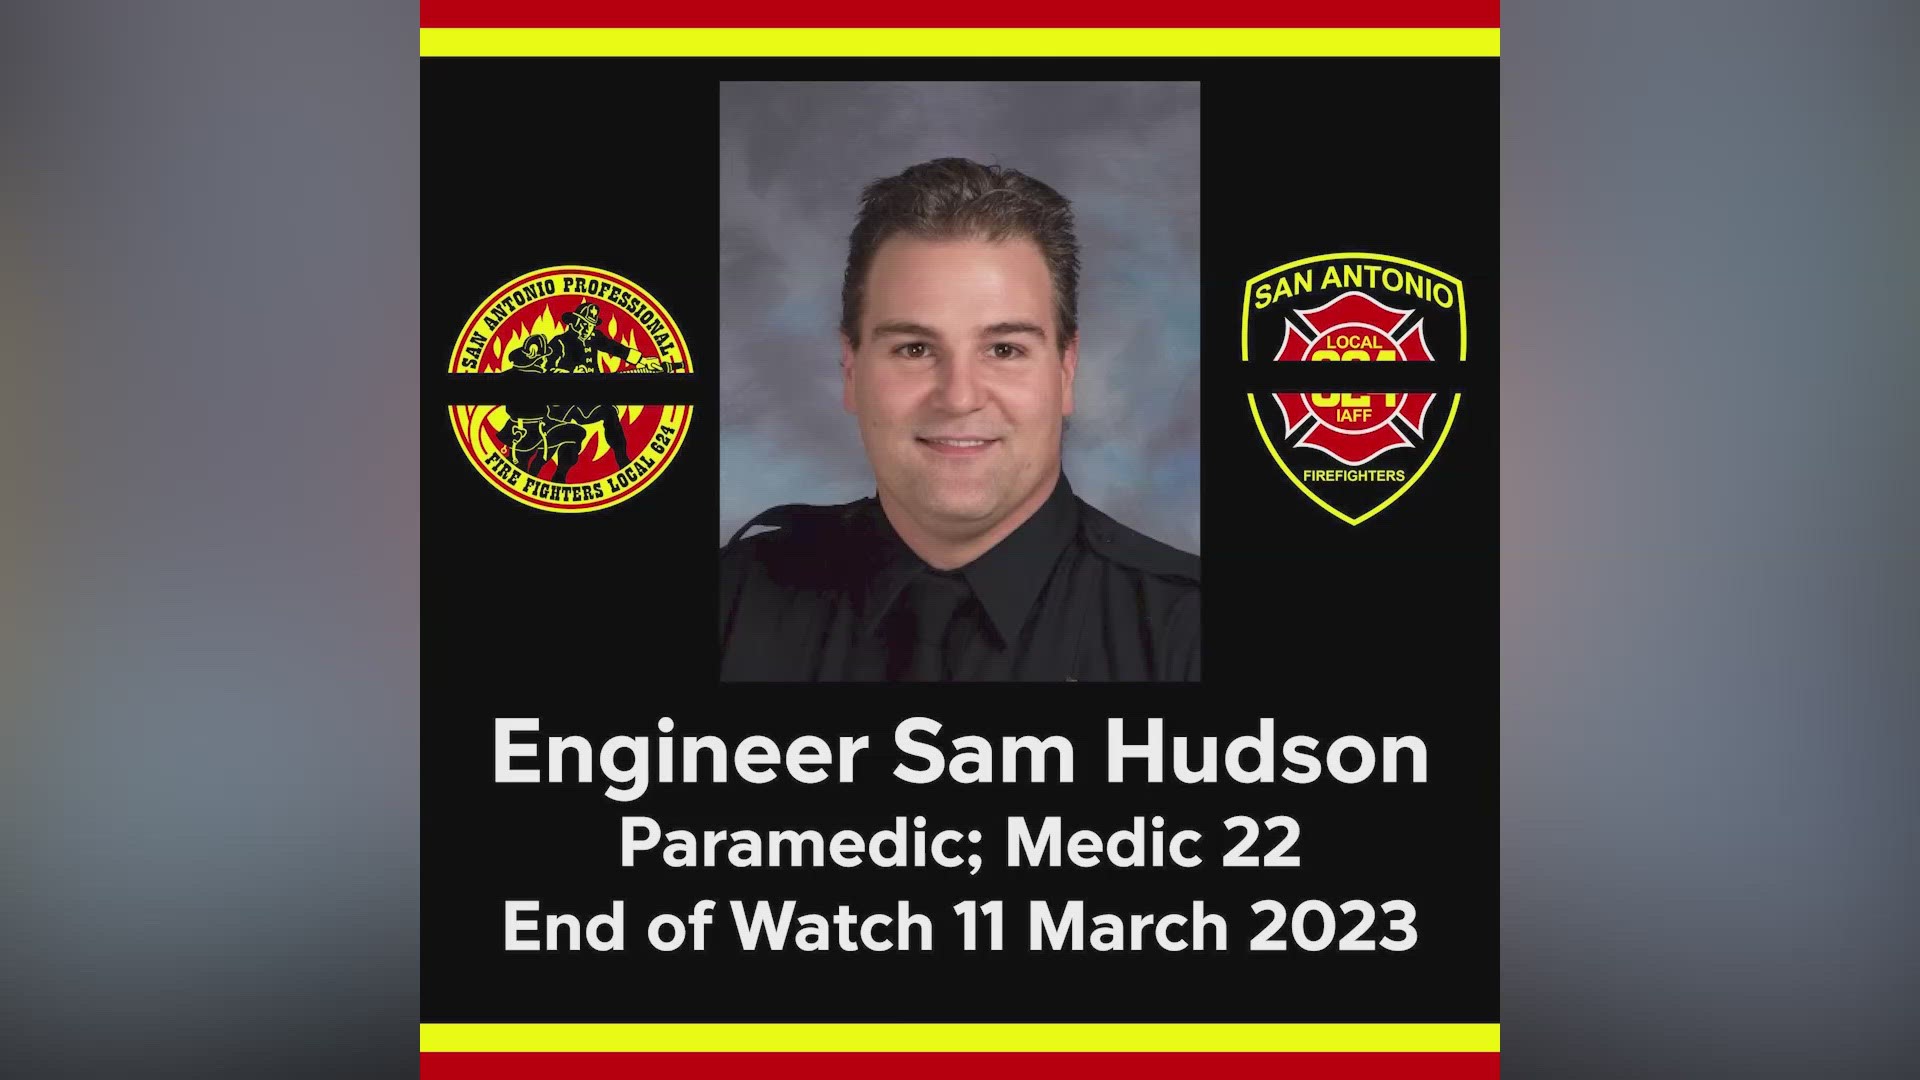 Friends and colleagues gave Samuel Hudson CPR after he suffered a heart attack, but he died in the hospital several days later.